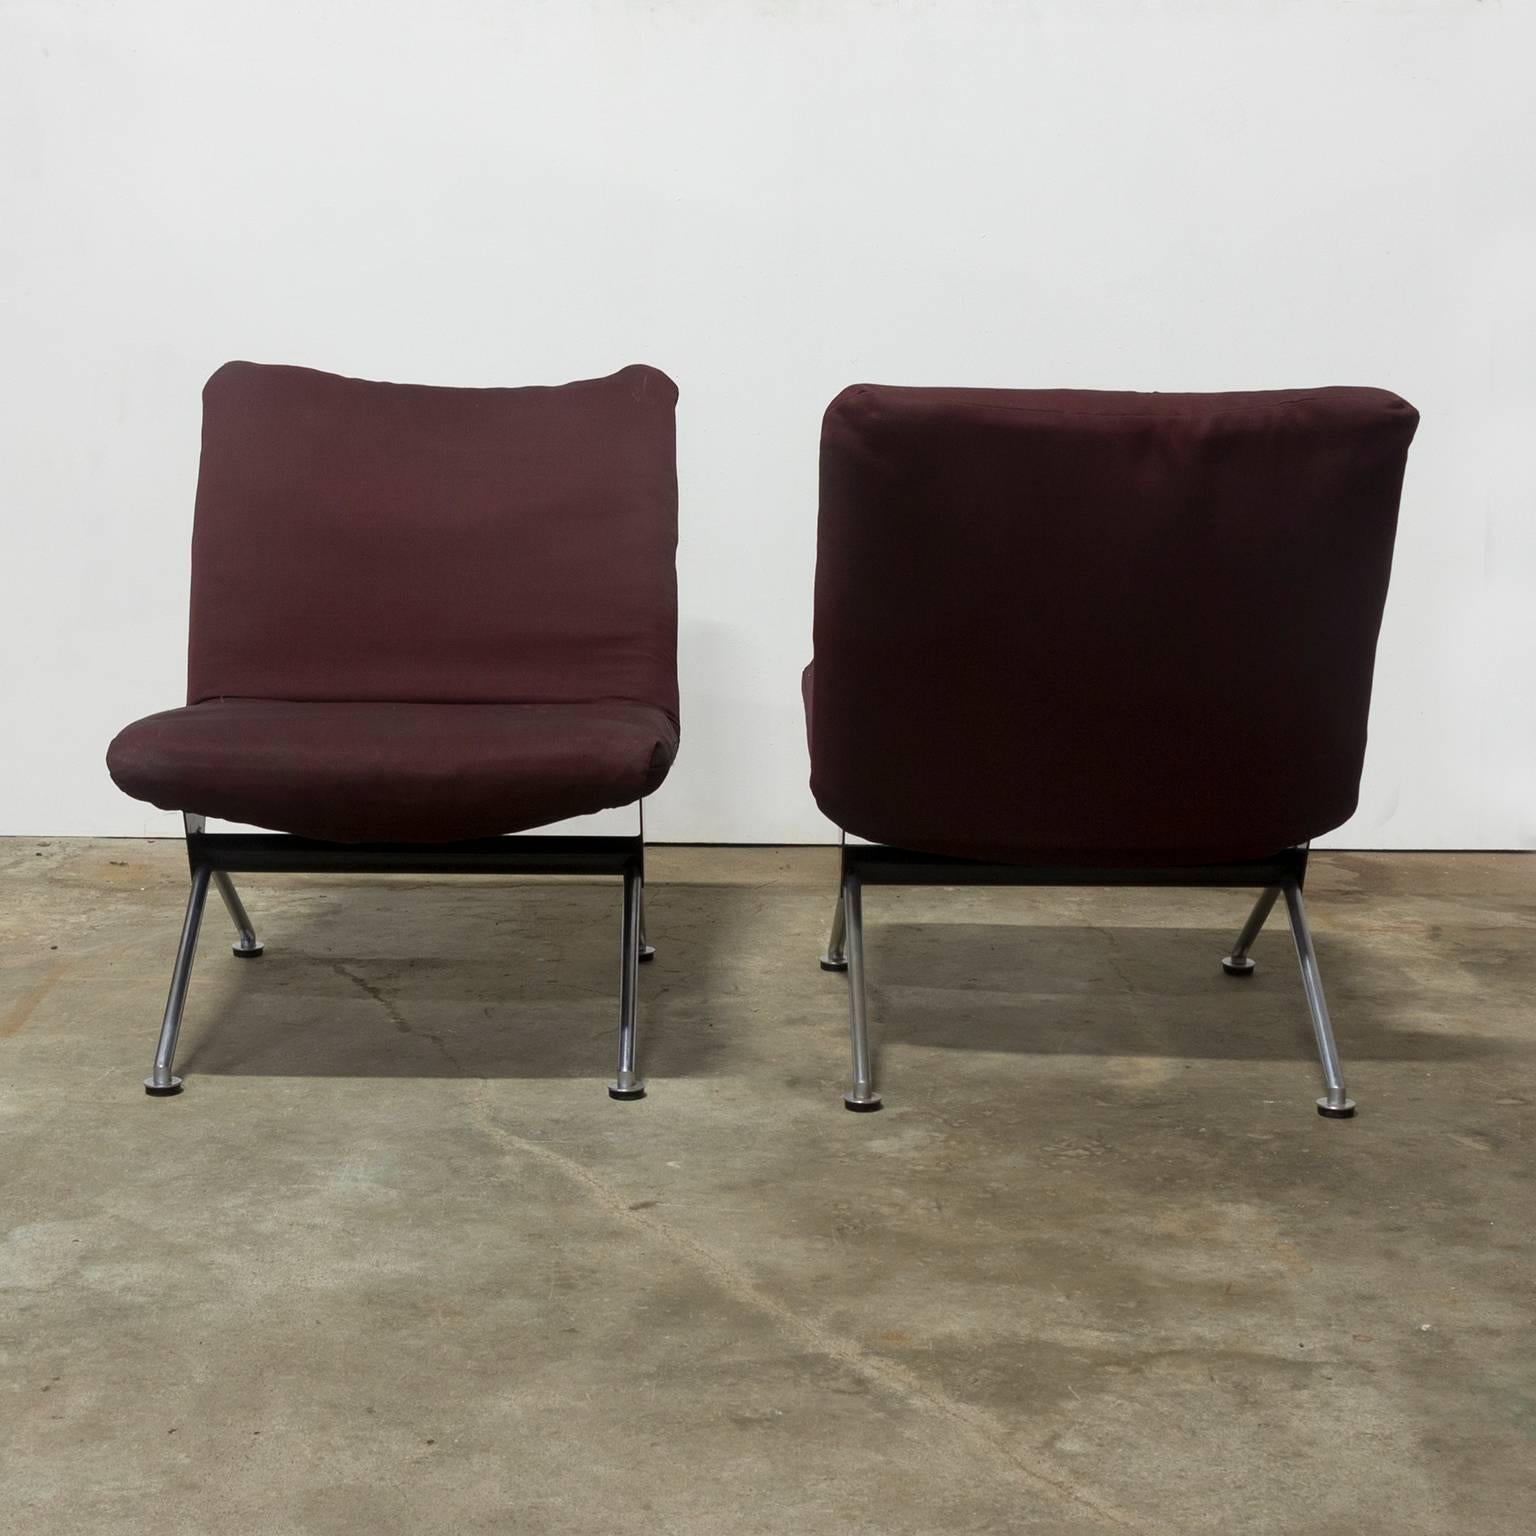 1961, Andre Cordemeyer for Gispen, Set of Two Mid-Century Dutch Easy Chairs 1432 In Fair Condition For Sale In Amsterdam IJMuiden, NL